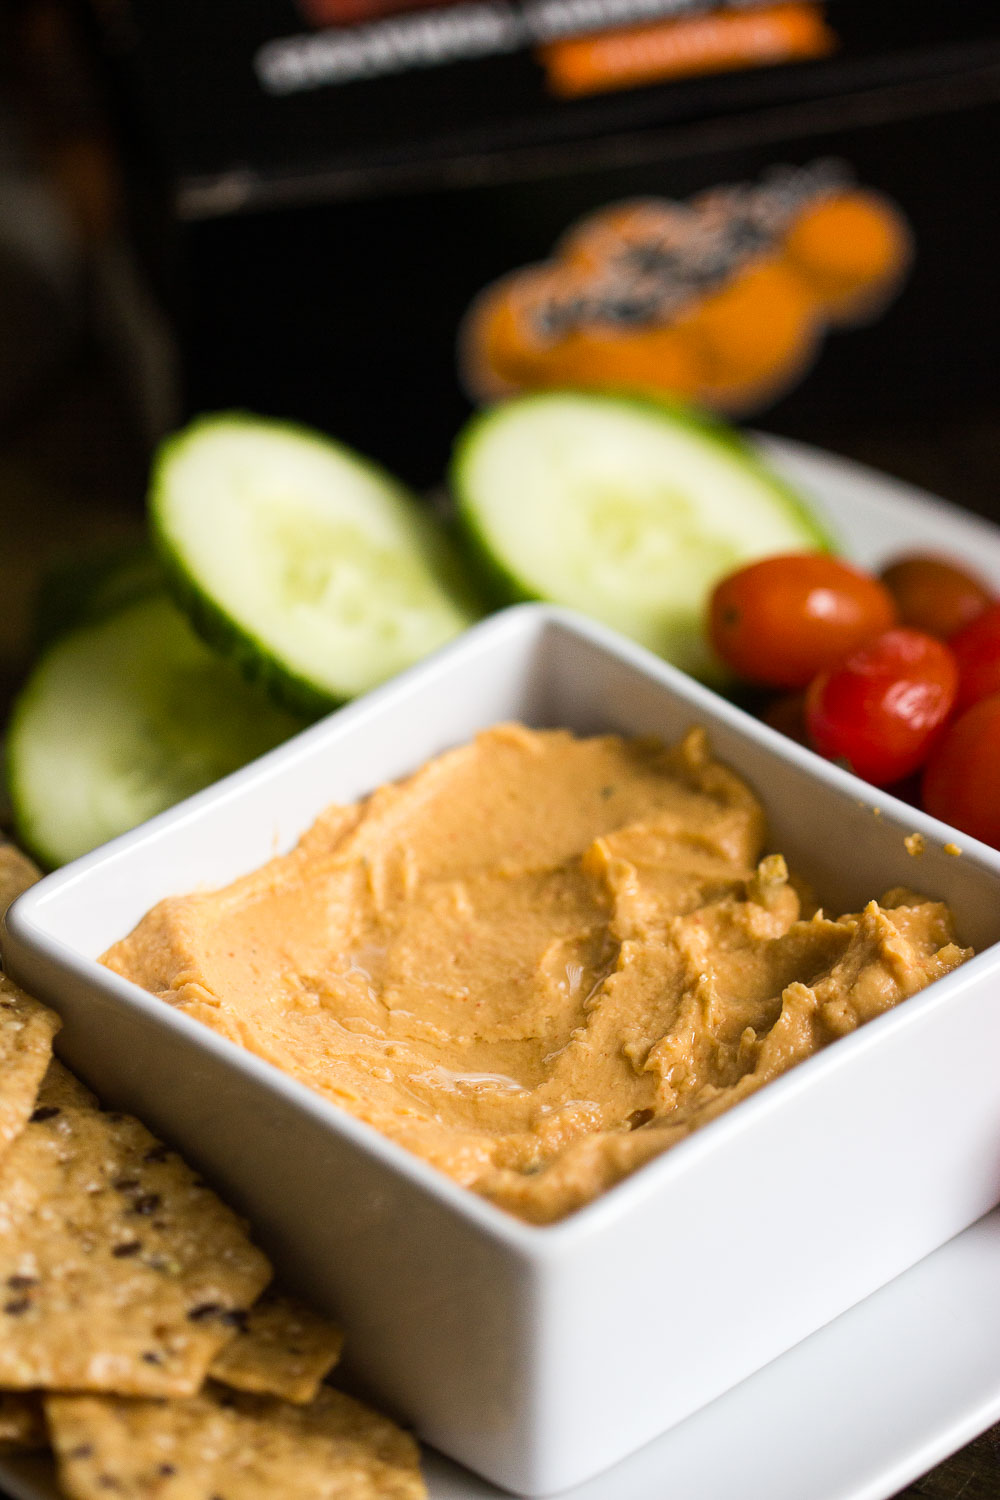 Best Curry Hummus that will leave you craving the flavor for days after trying it!